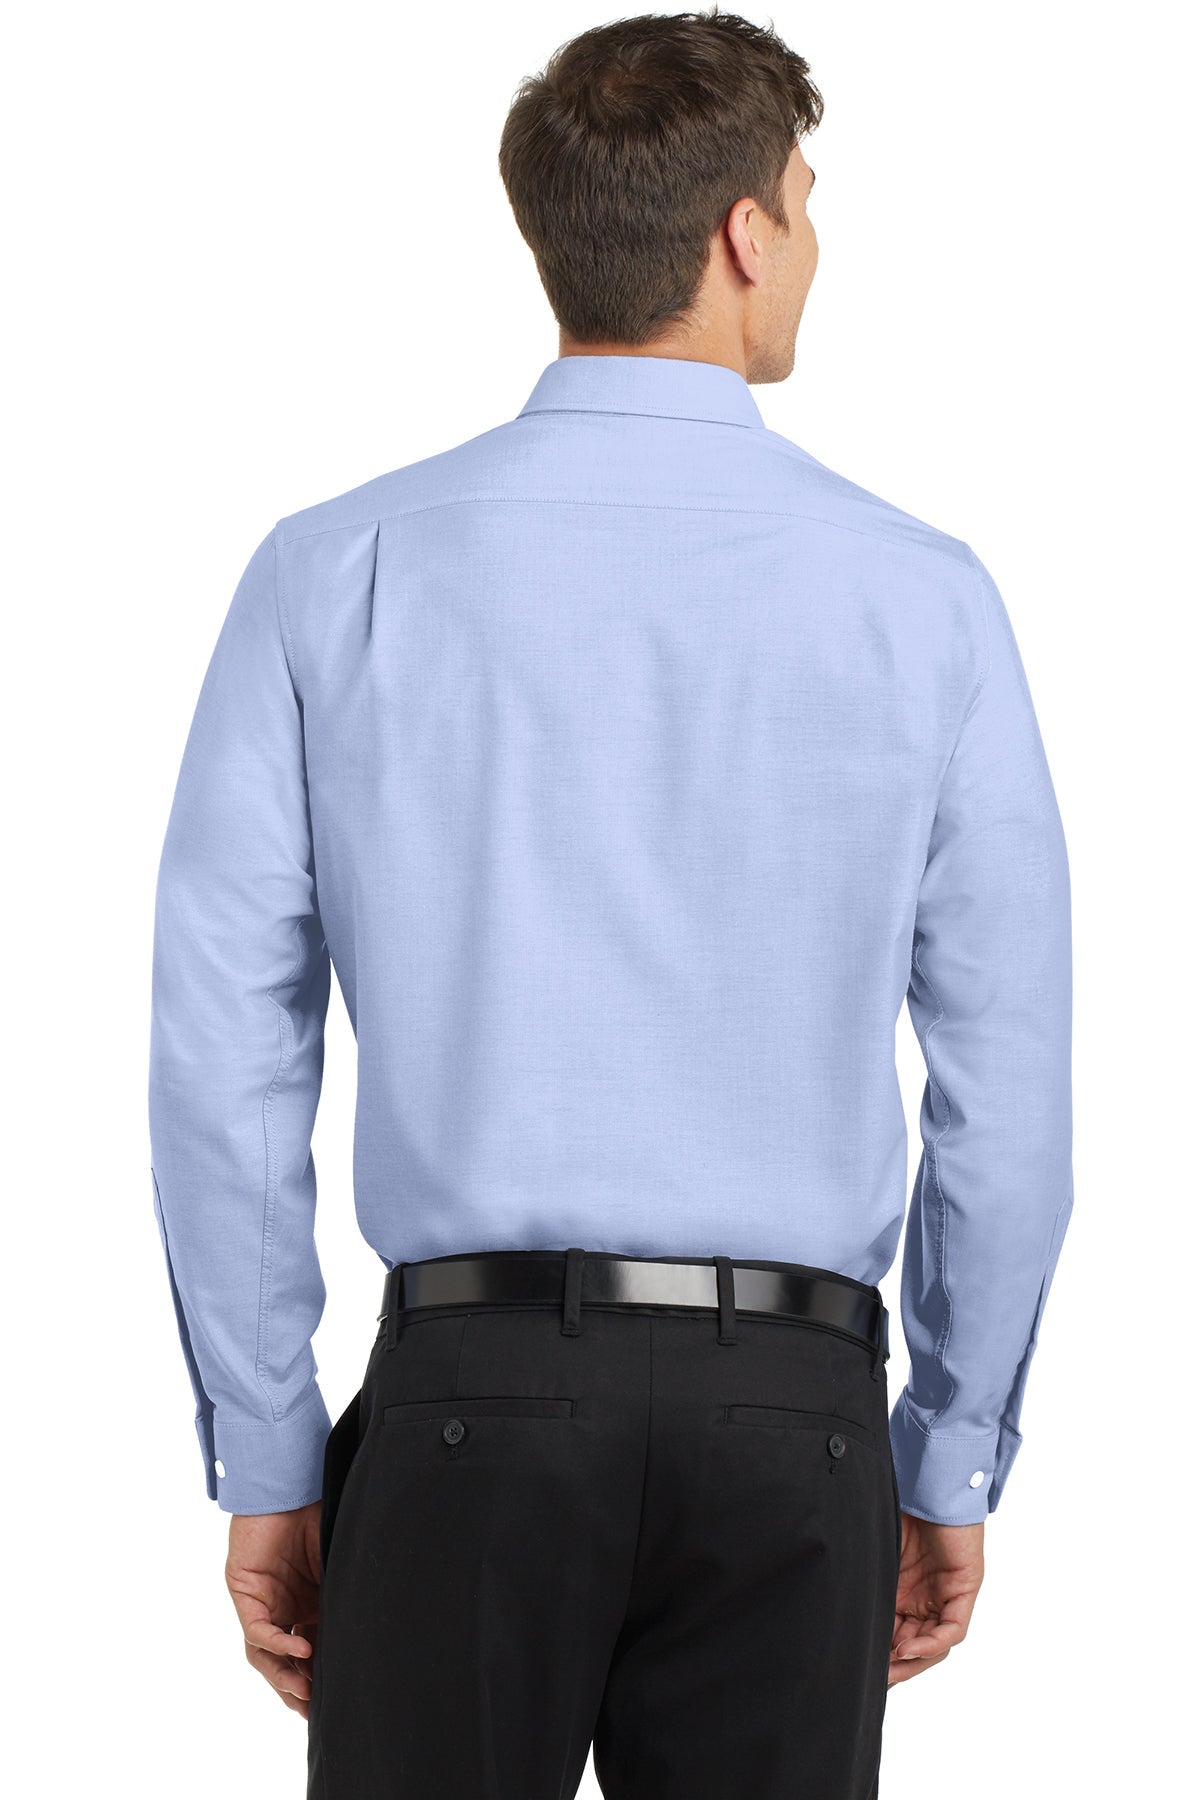 port authority_ts658 _oxford blue_company_logo_button downs